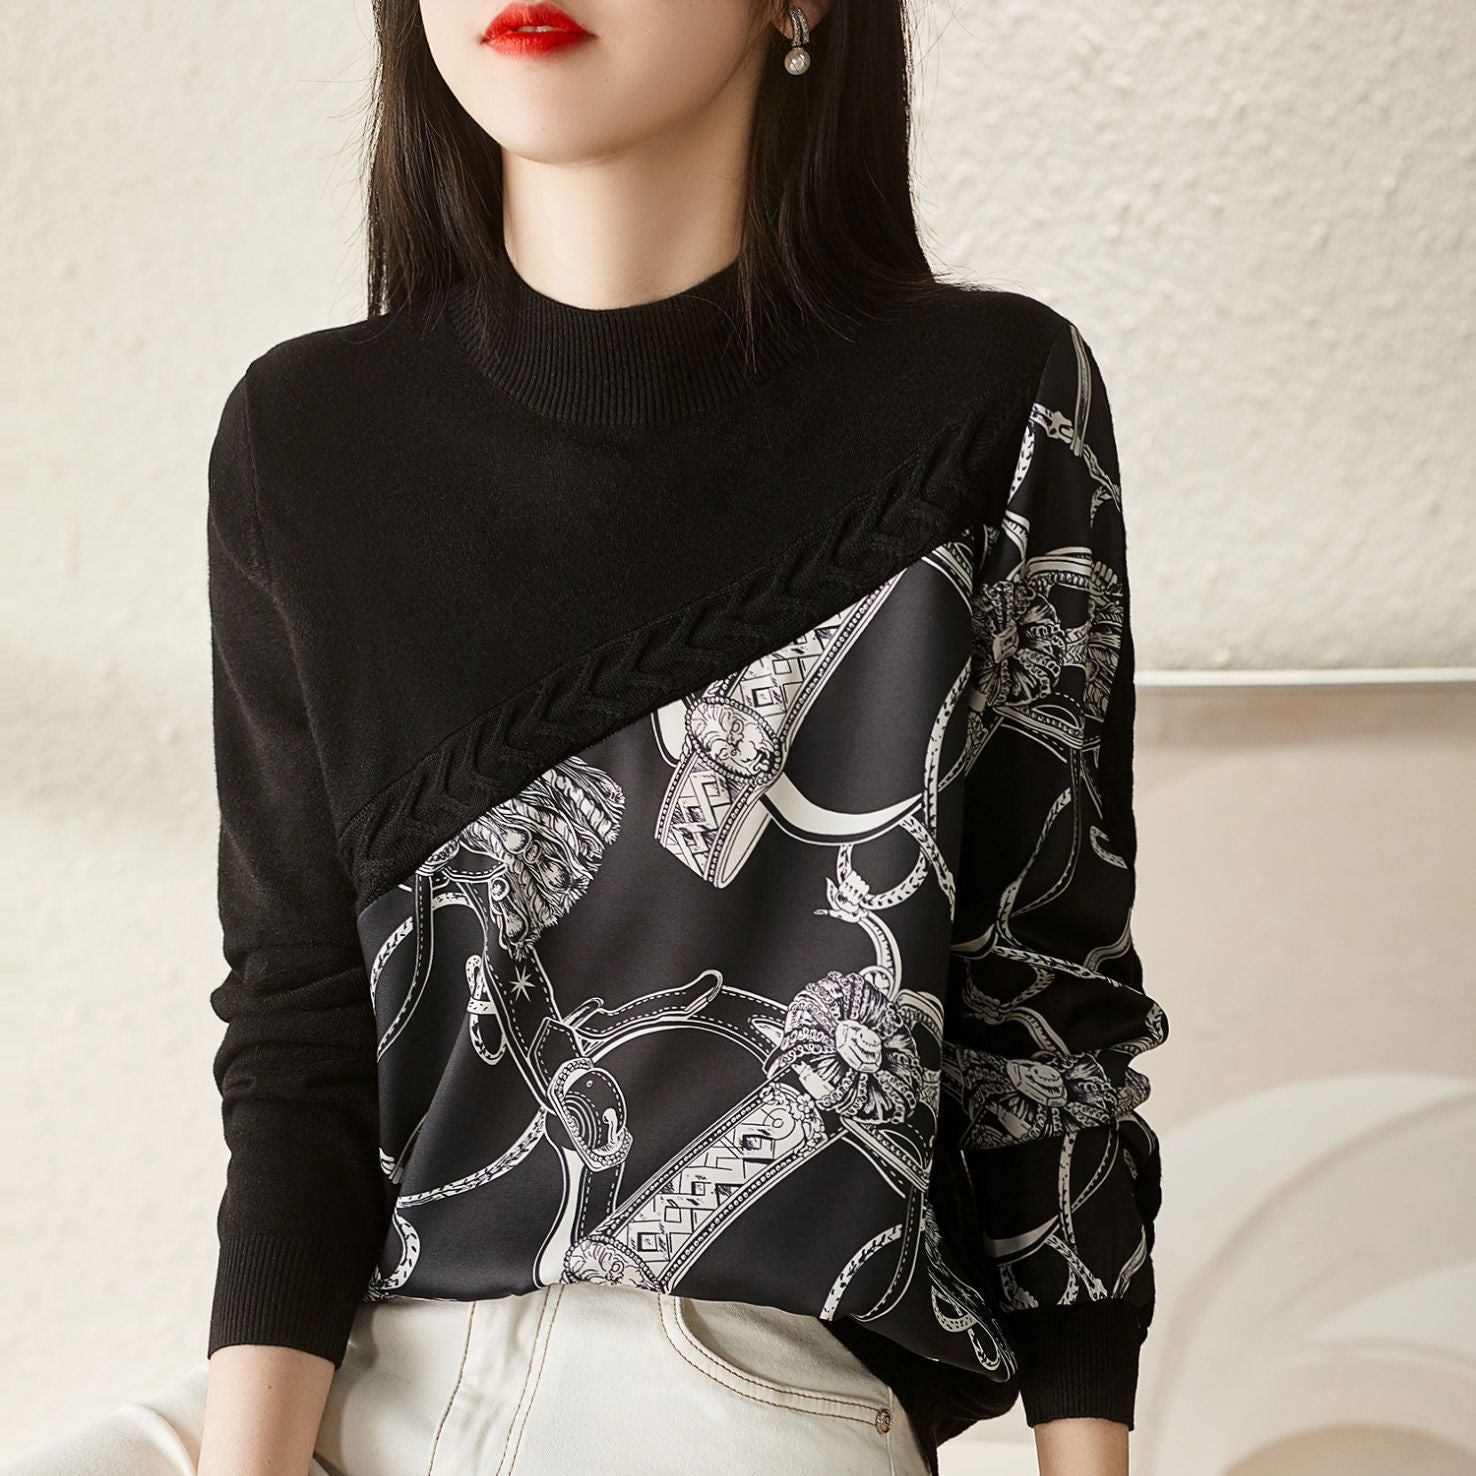 Neck Print Spliced Knitwear Pullovers Threaded Clothing-Veeddydropshipping